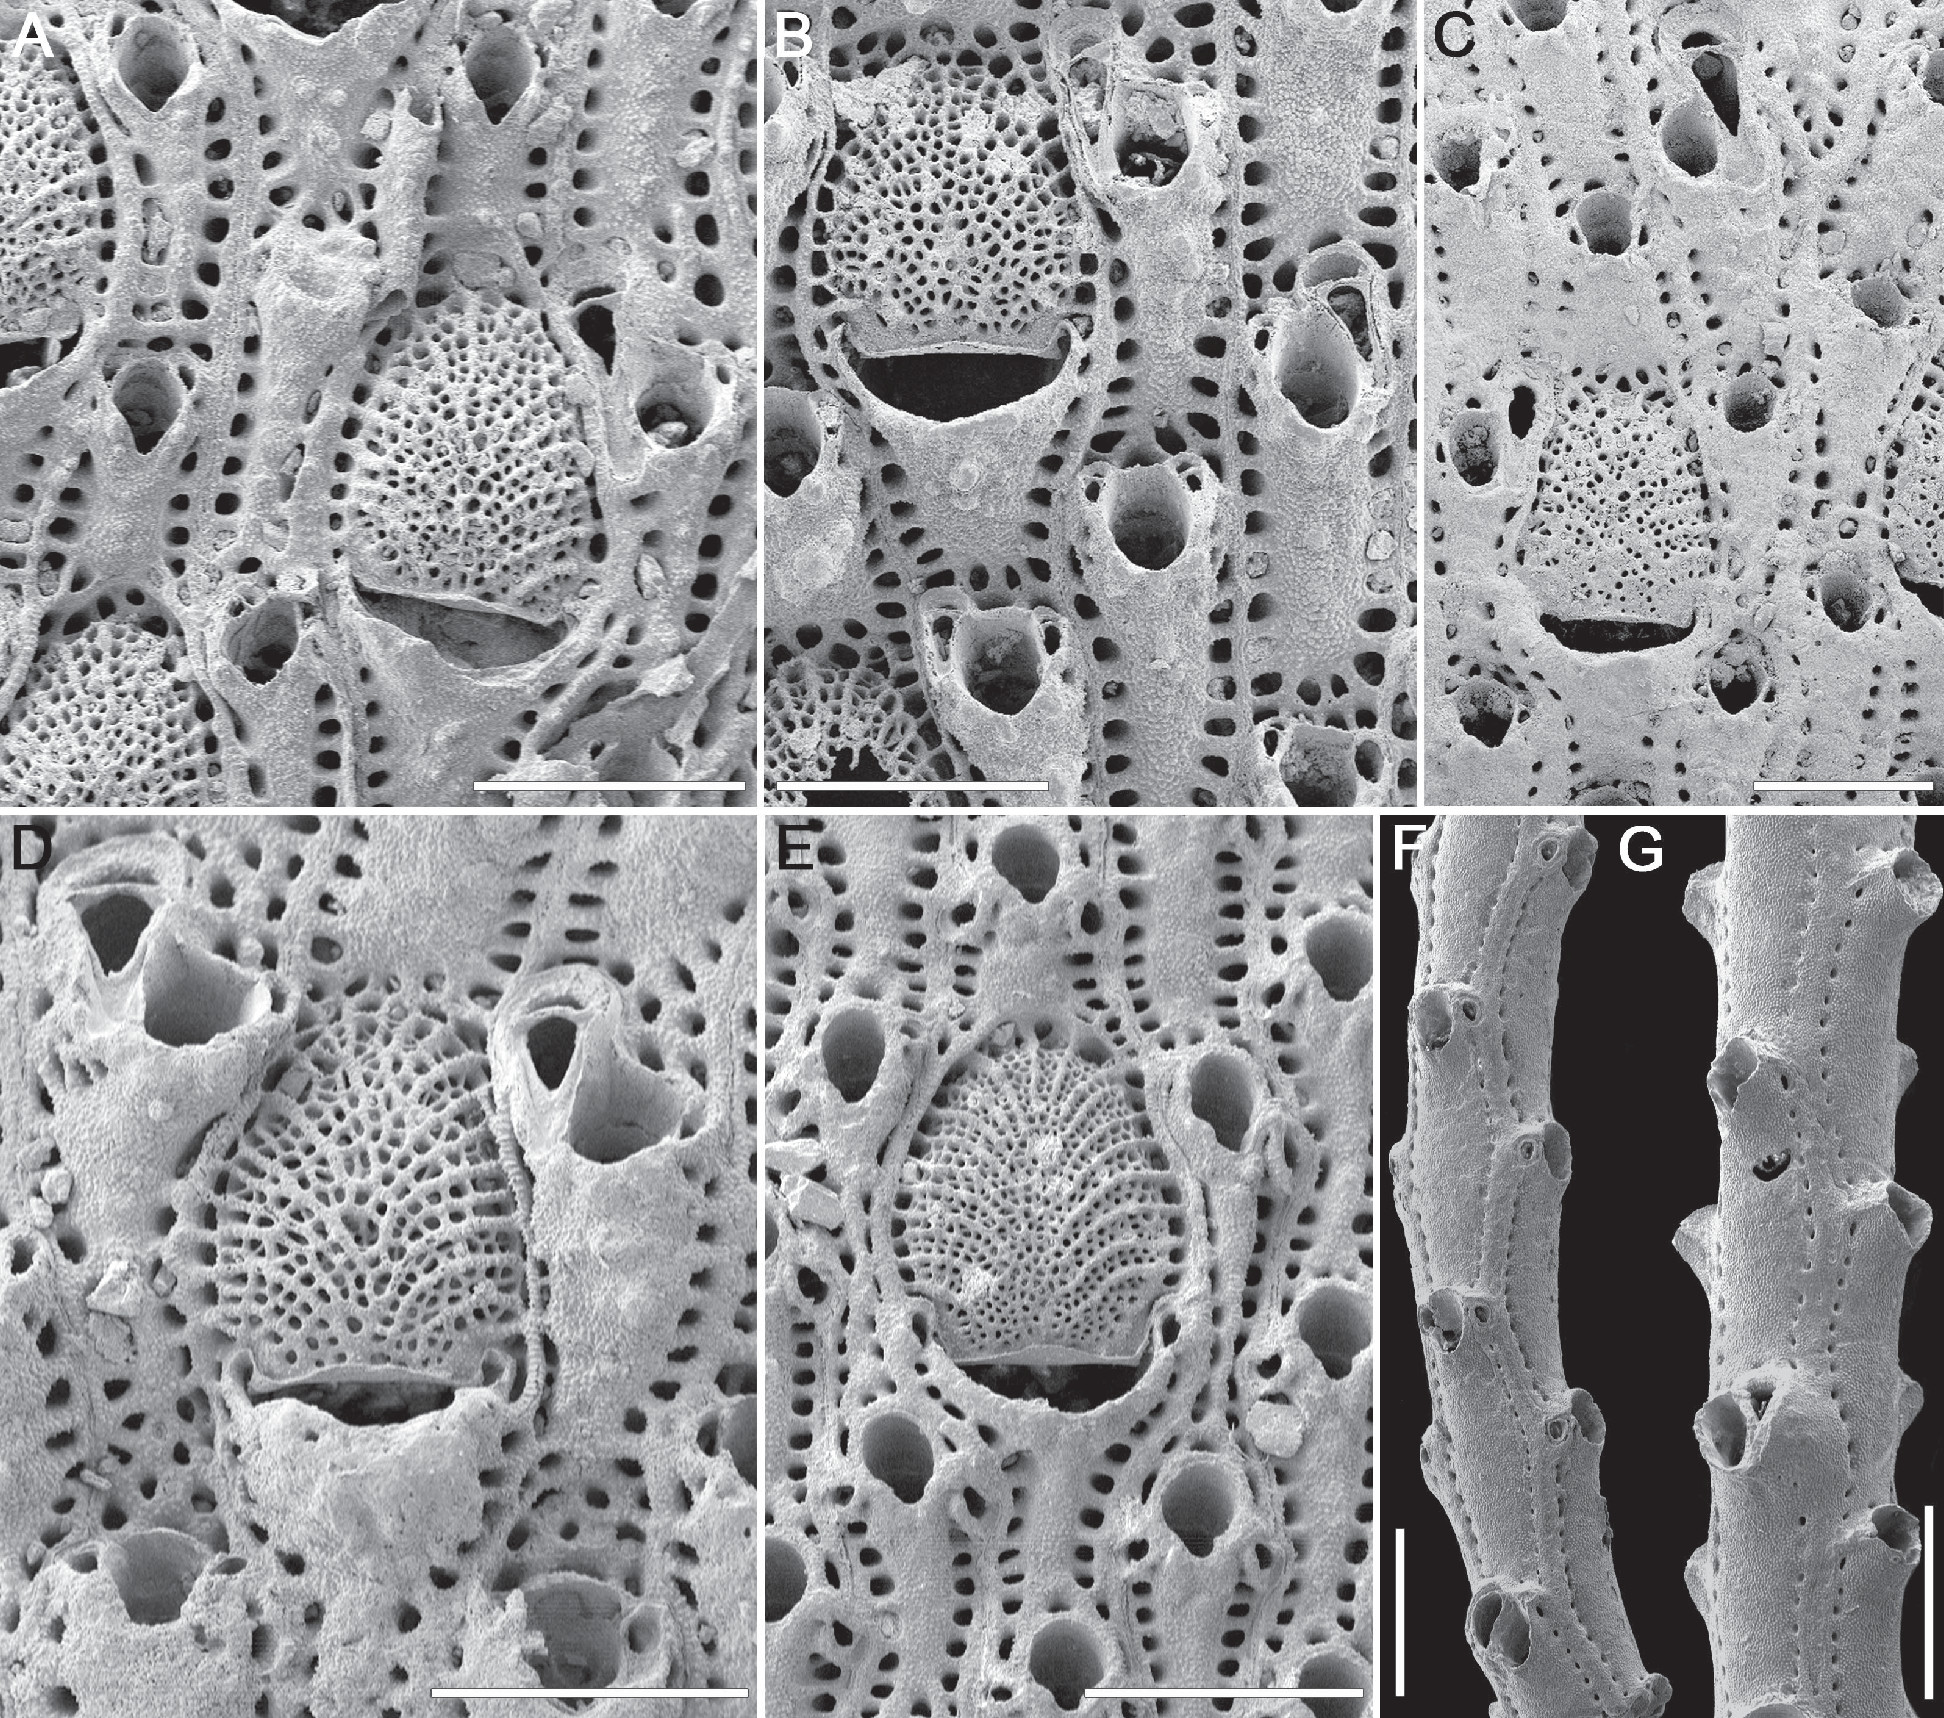 Electron micrograph of bryozoans with six panels, each showing several zooids.